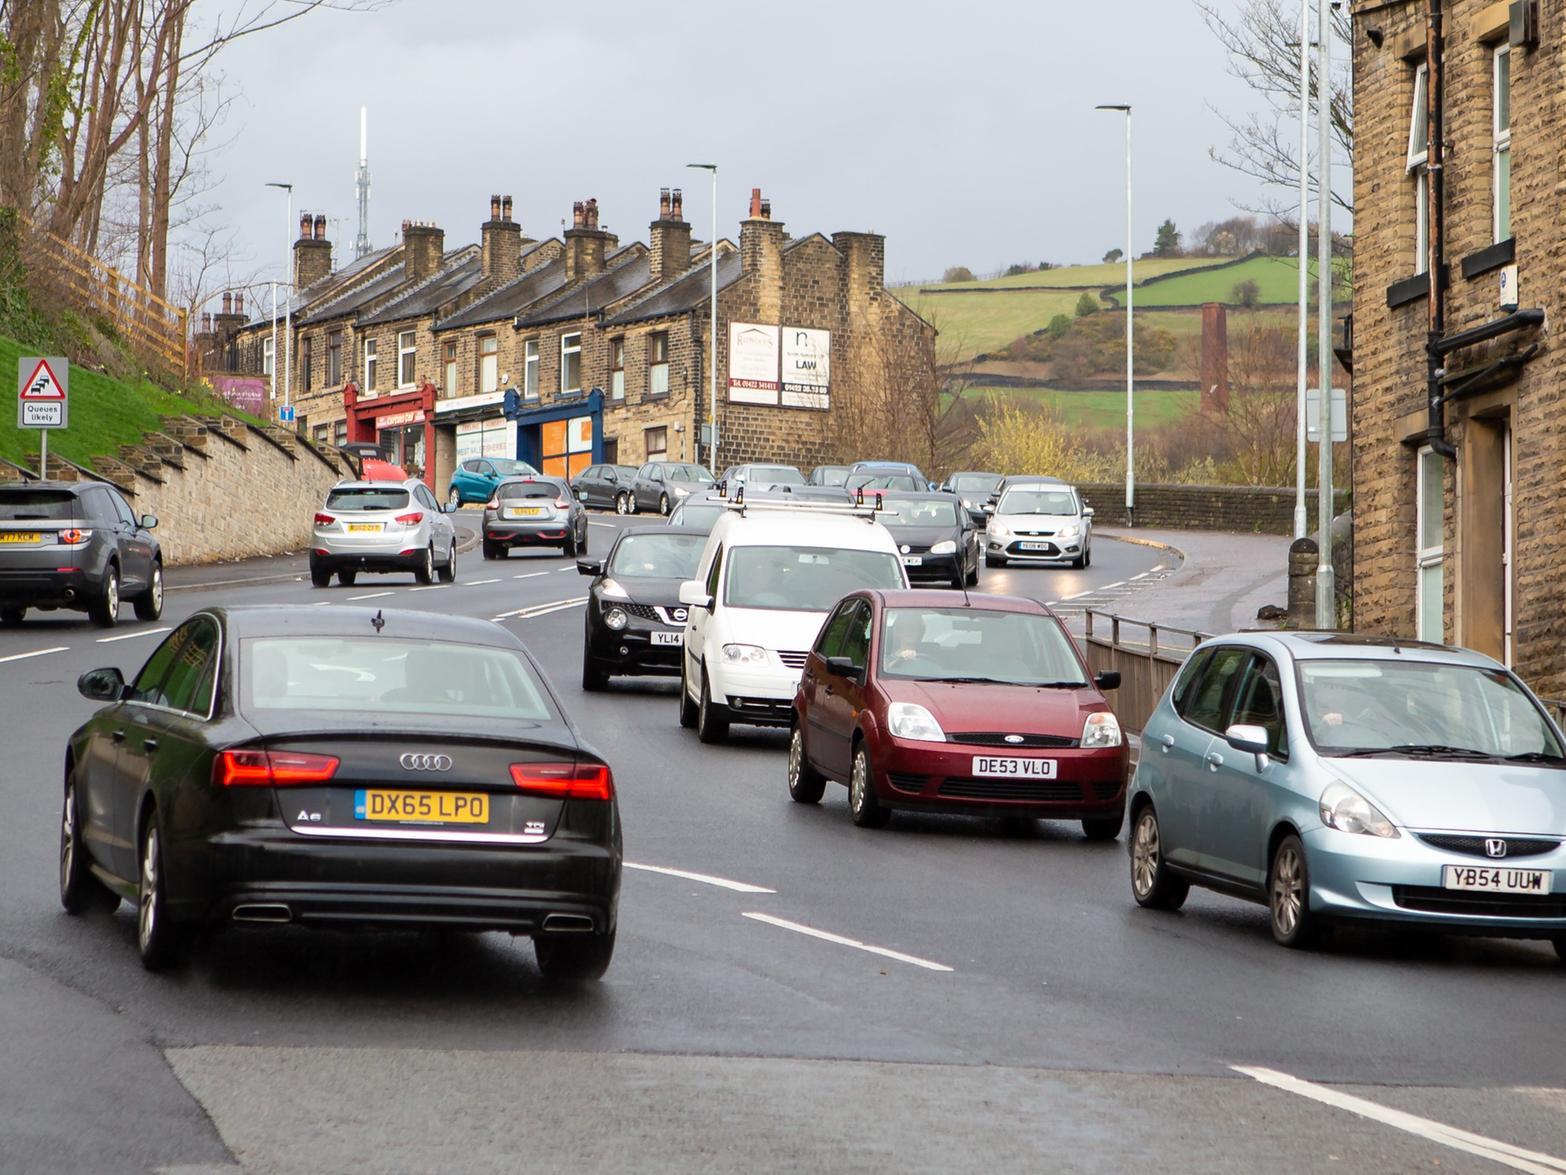 As part of a project which is still ongoing, Salterhebble Hill has seen a change since the year 2000. In an effort to reduce congestion, 2017 saw the development of the road to improve traffic flow.